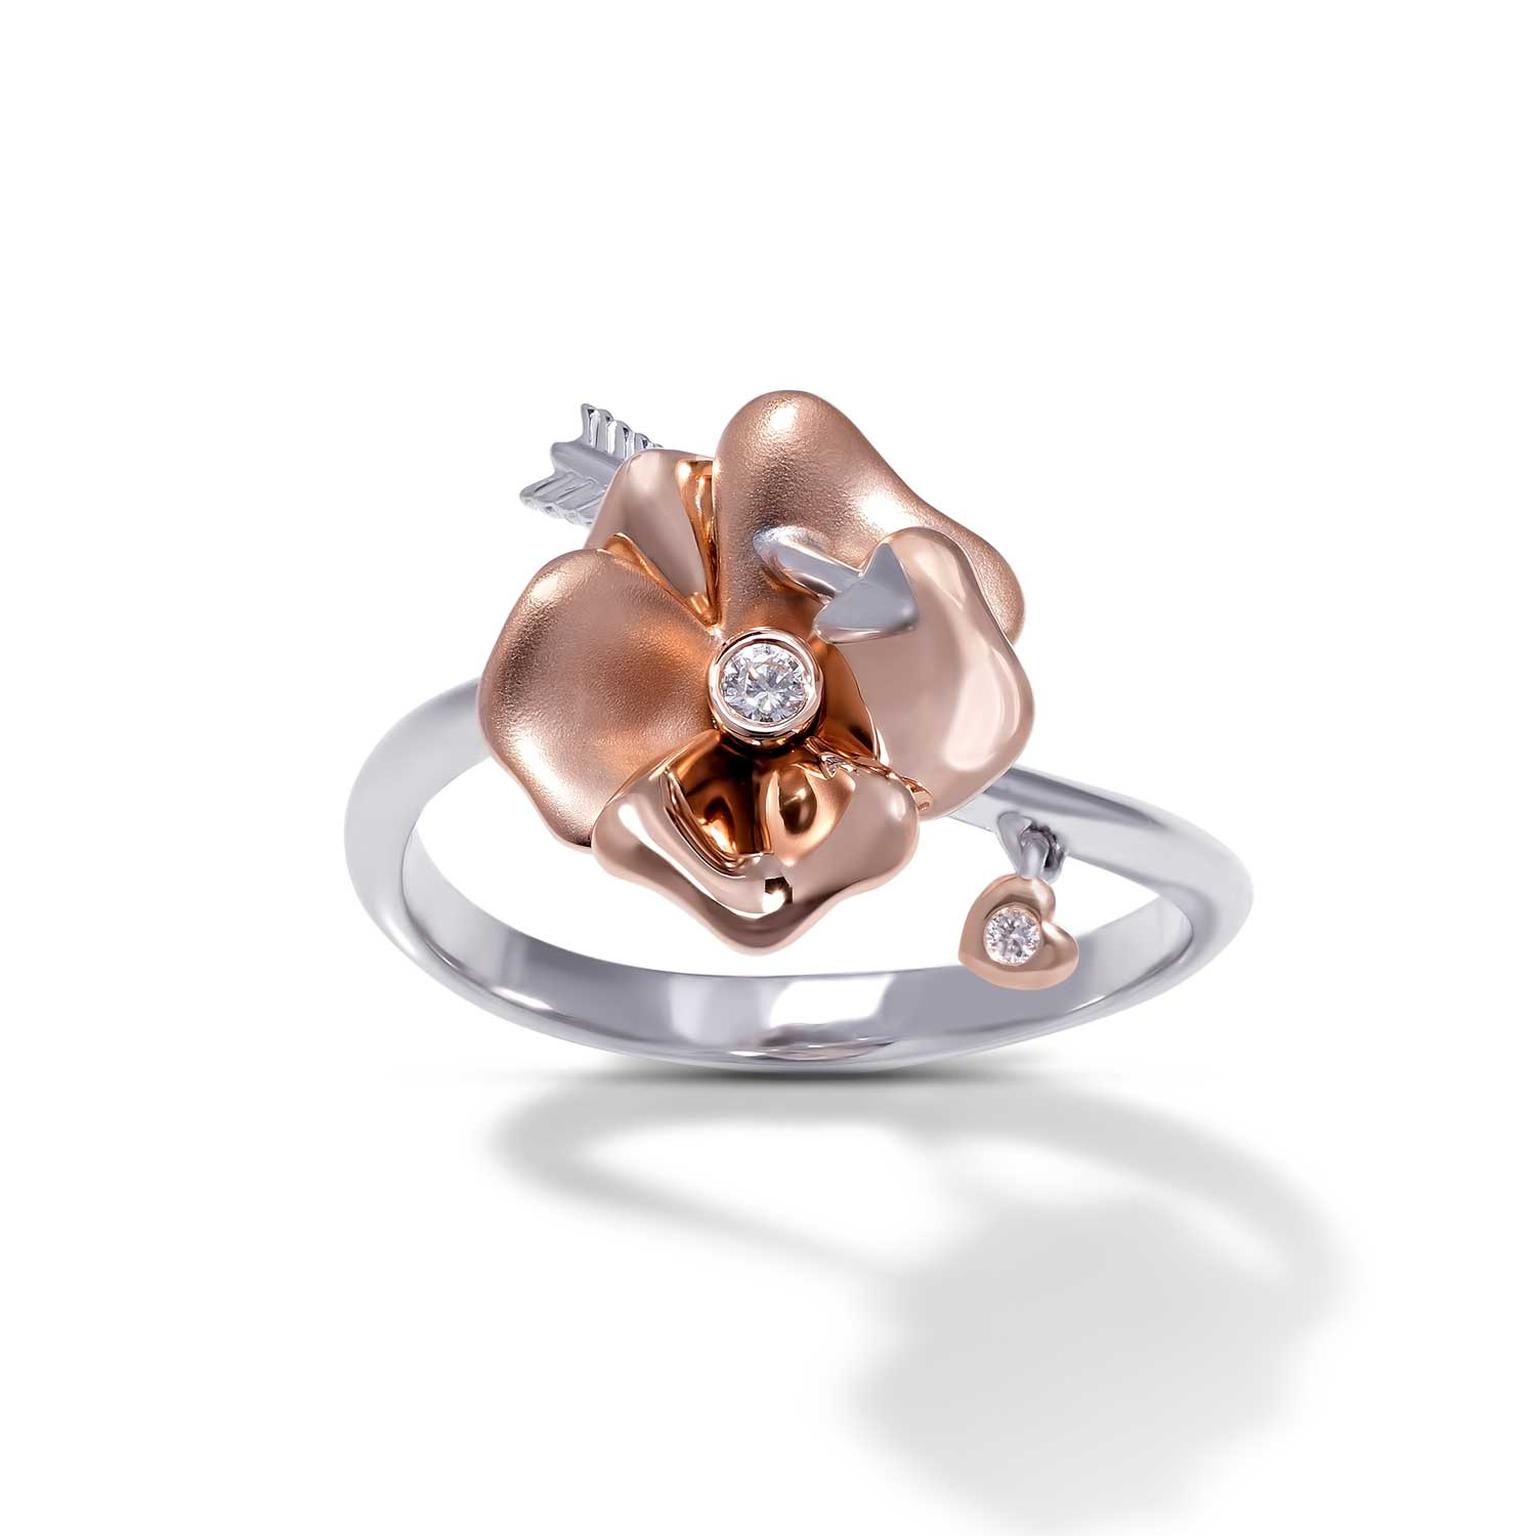 Stenzhorn Cupid's Potion rose gold and diamond ring